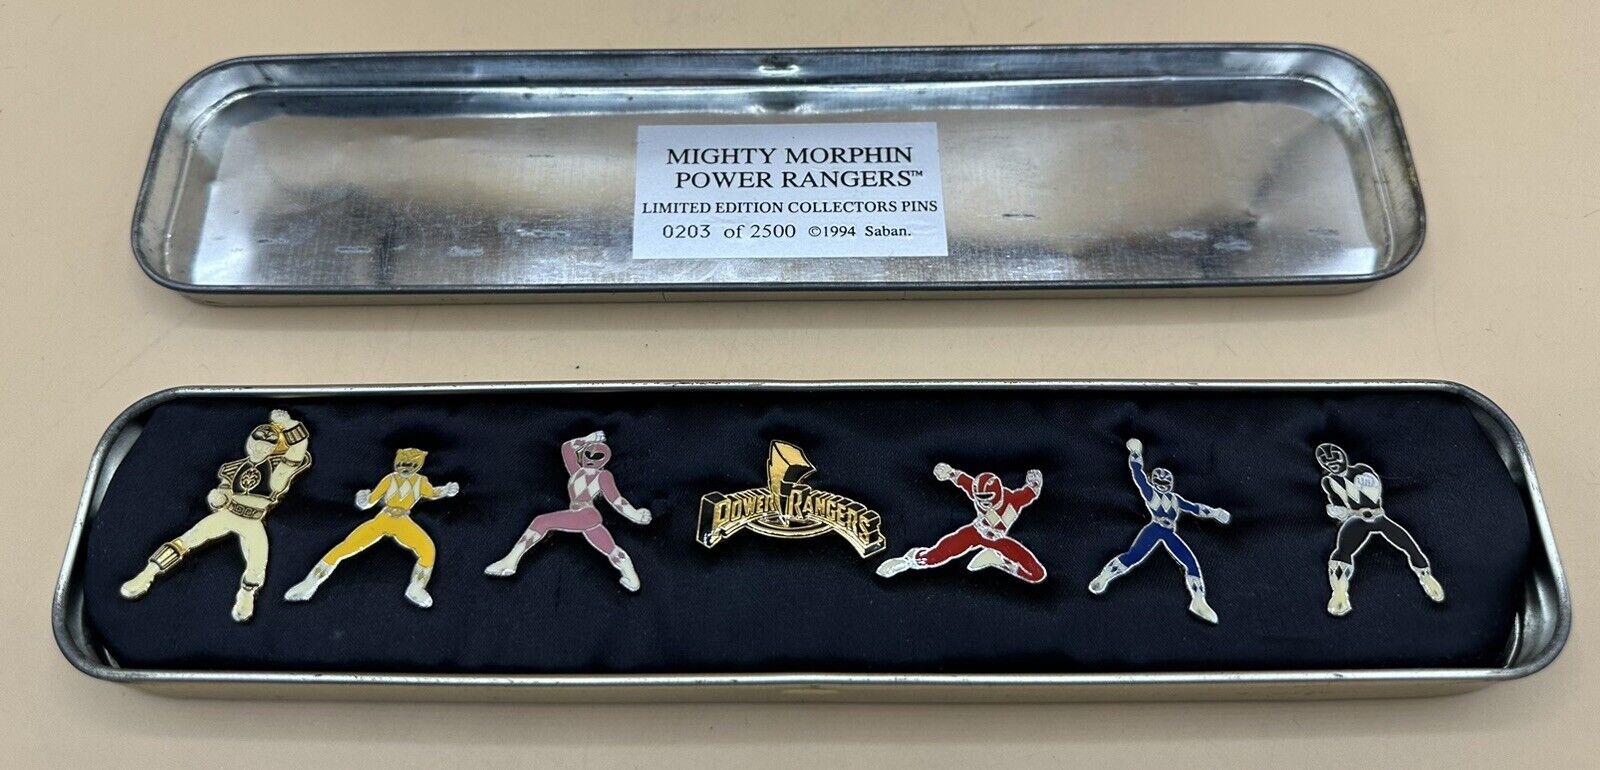 Vintage 1994 Saban Mighty Morphin Power Rangers Limited Edition Collector Pins